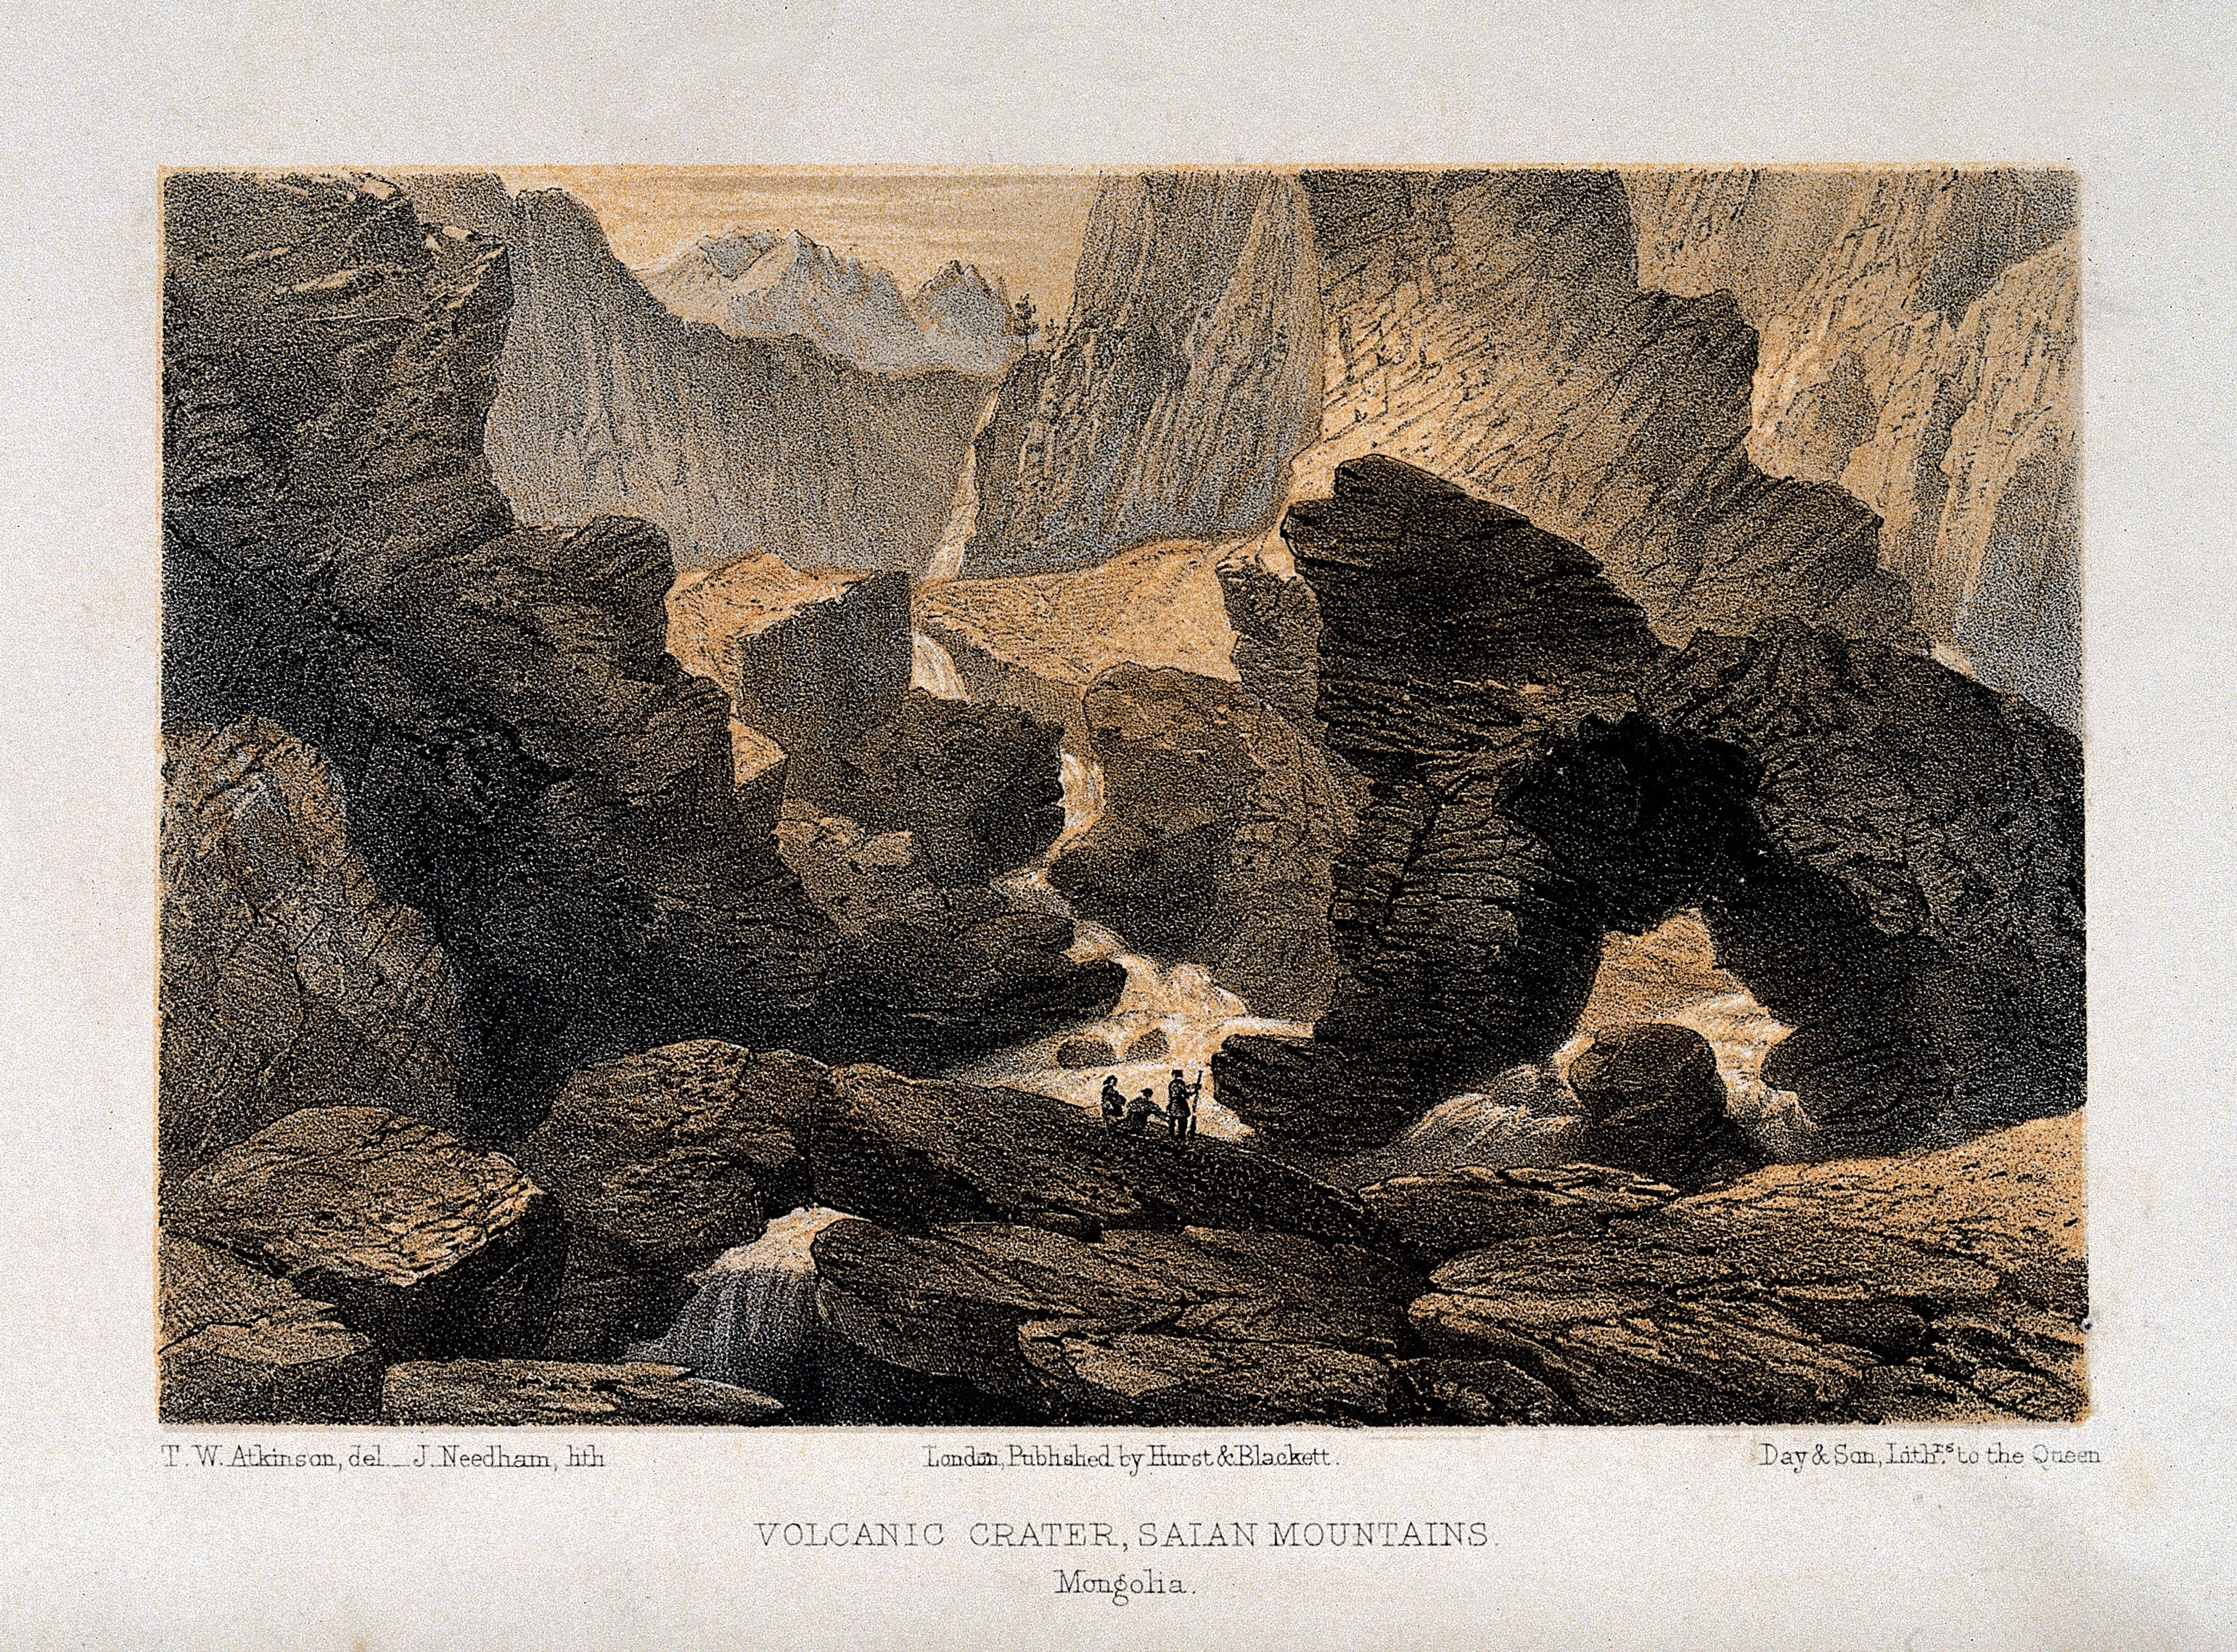 Lithograph of a volcanic crater in the [[Sayan Mountains